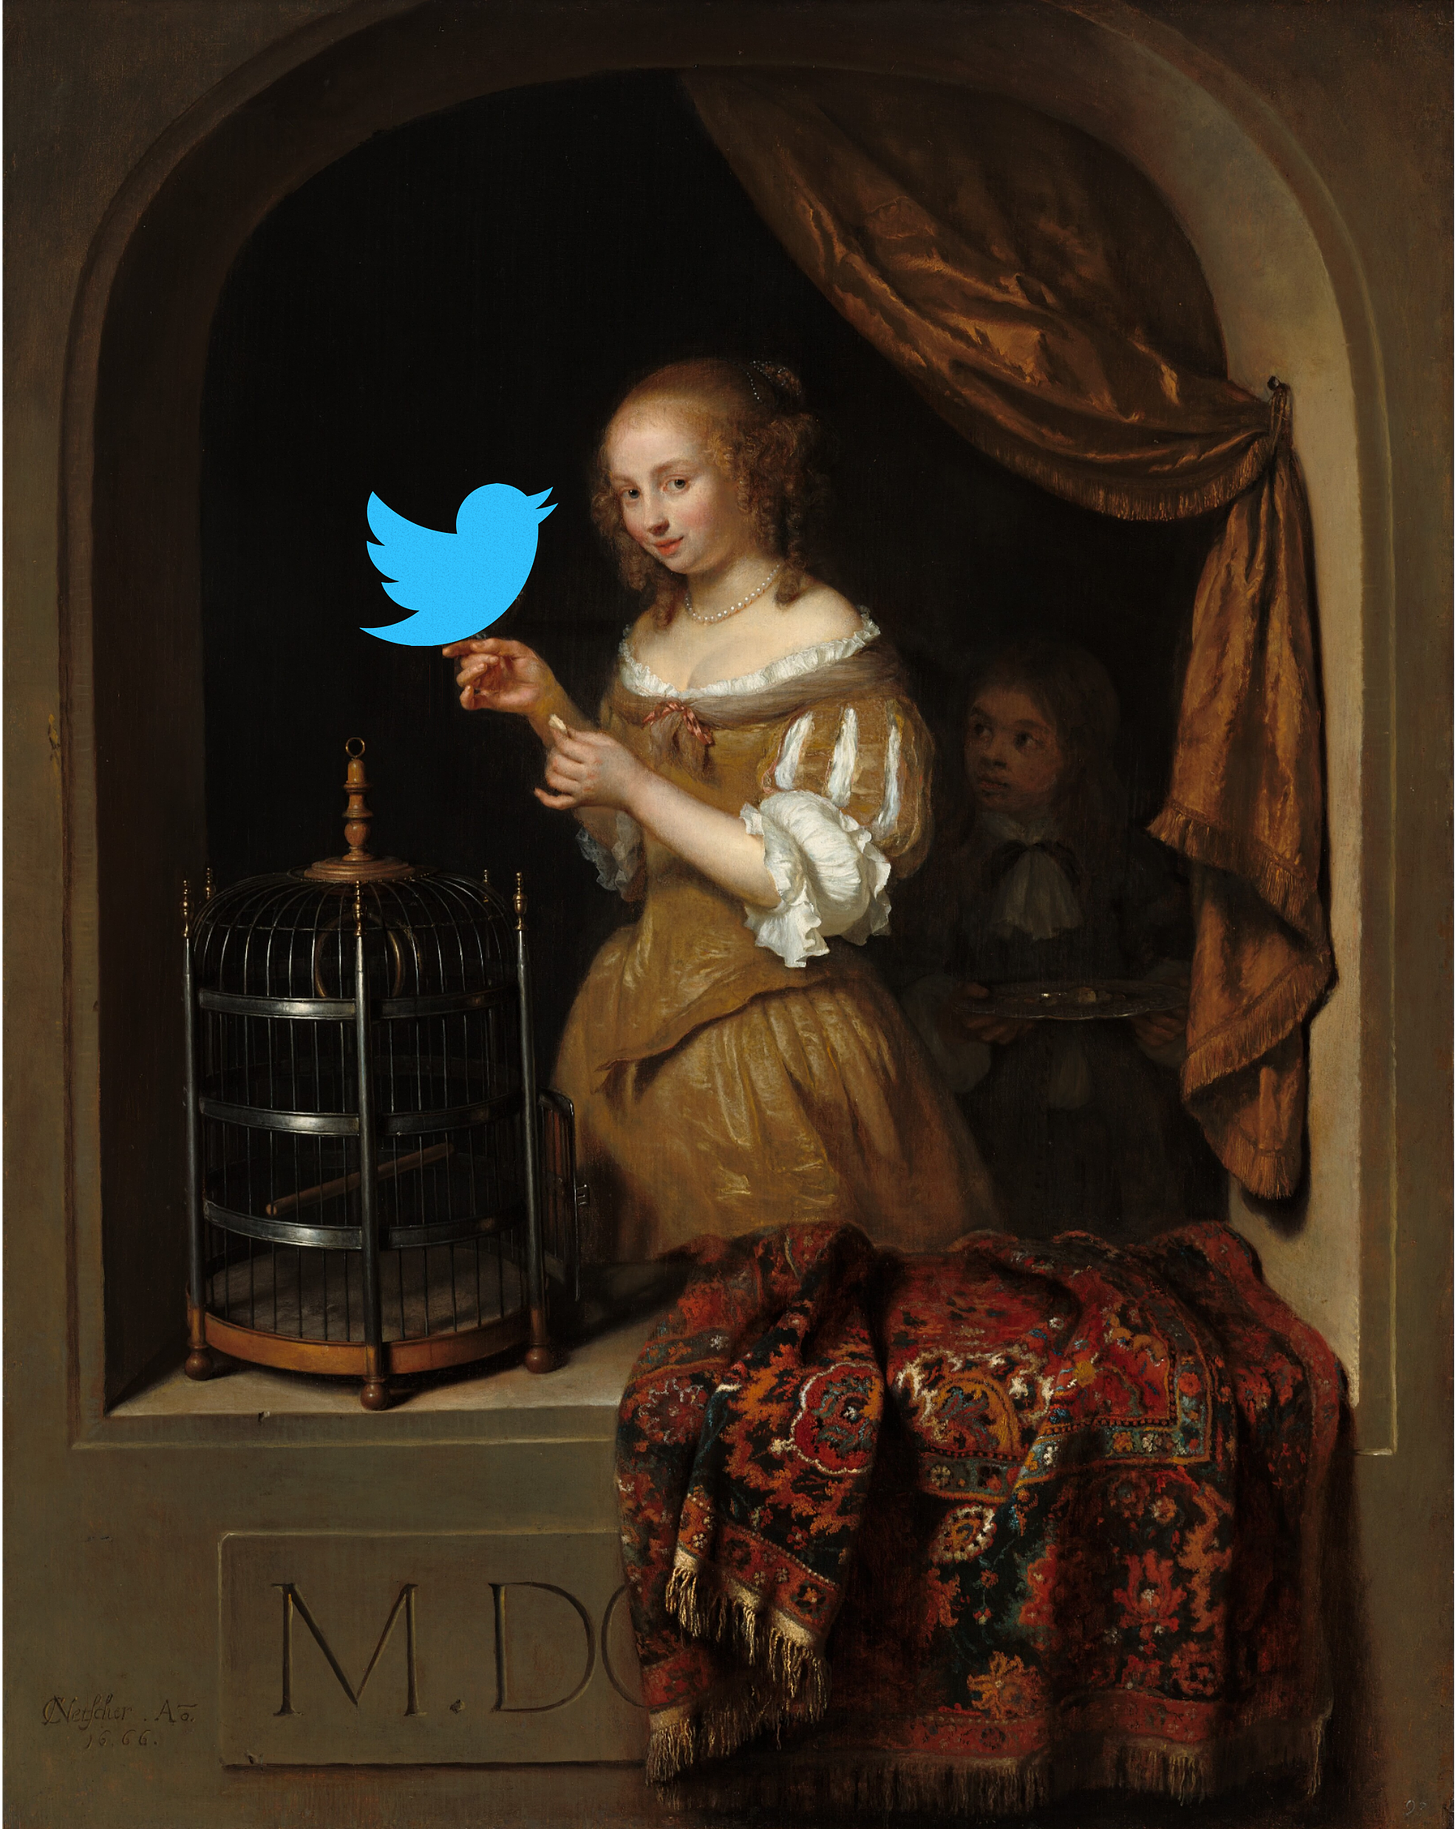 Caspar Netscher's painting "A woman feeding a parrot, with a page" edited with the Twitter logo in place of the bird